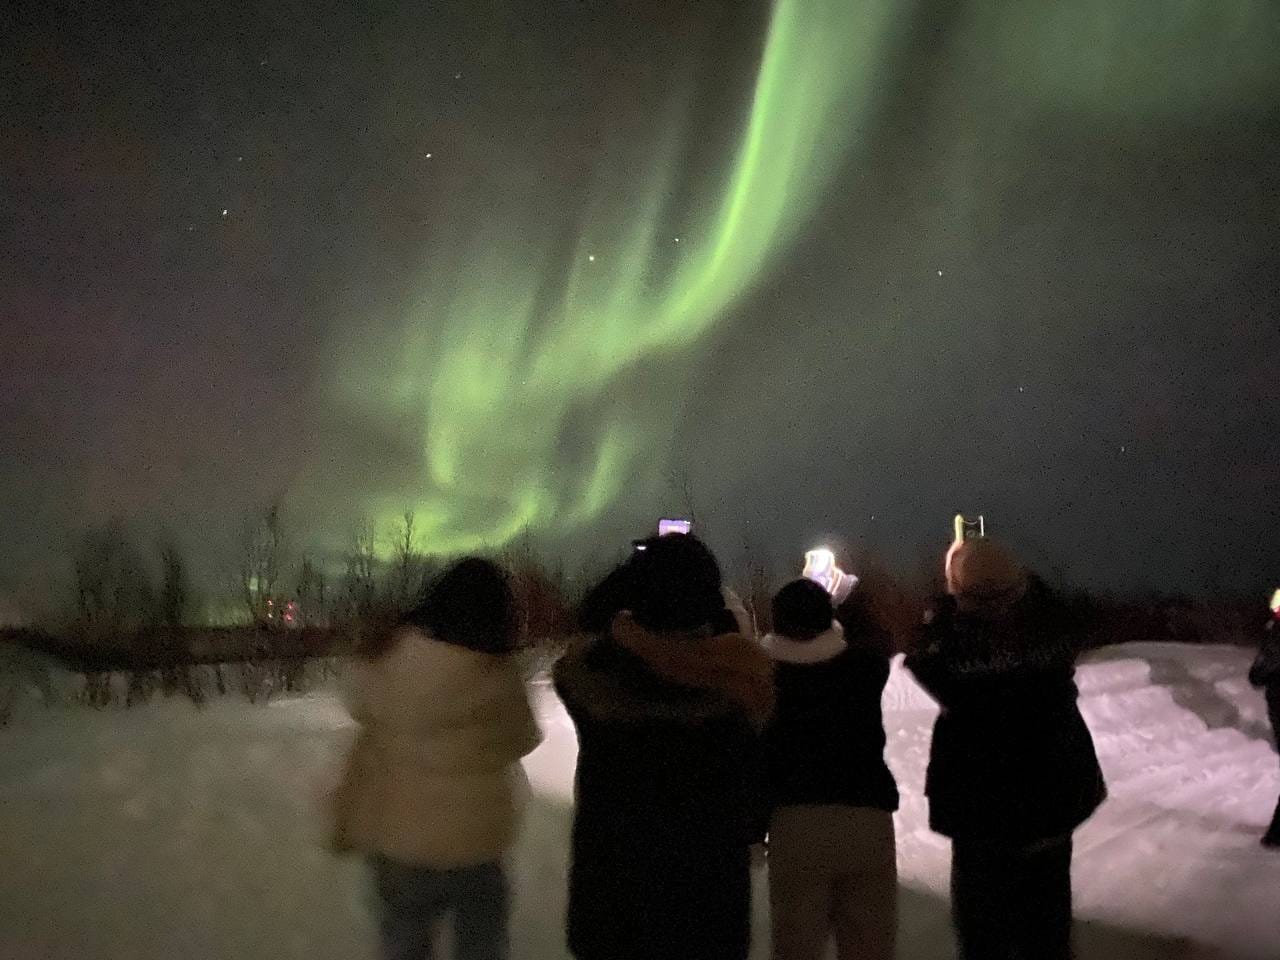 WUIC Exchange students in Russia see the Aurora for the first time